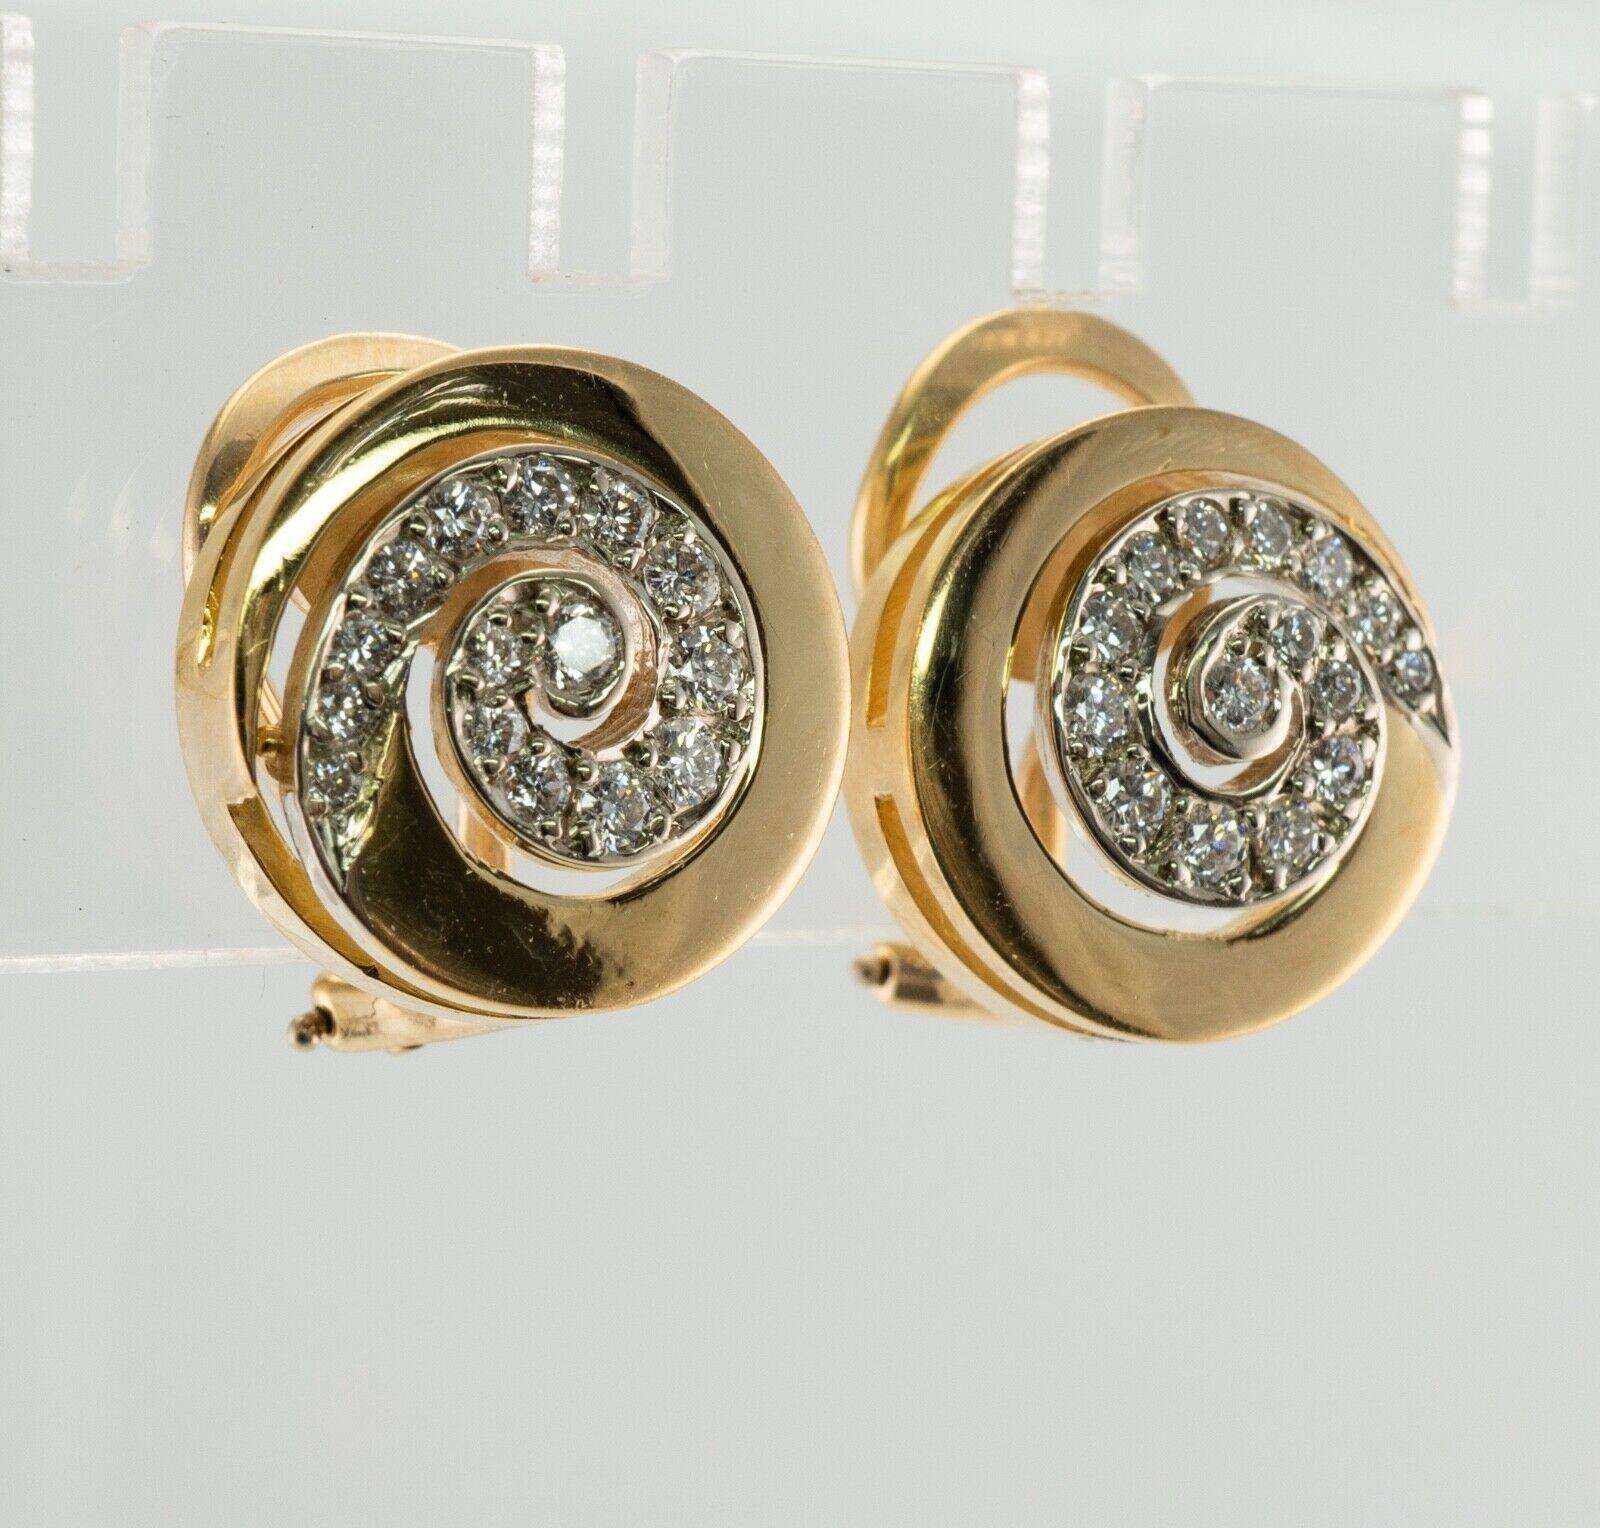 Swirl Spiral Diamond Earrings Ivan & Co Clips 18K Gold
 
These designer earrings are made by Ivan & Co.
Solid 18K Yellow Gold
Each earring is set with 15 round cut diamonds of VVS2 clarity and H color.
The total diamond weight for the pair is .90